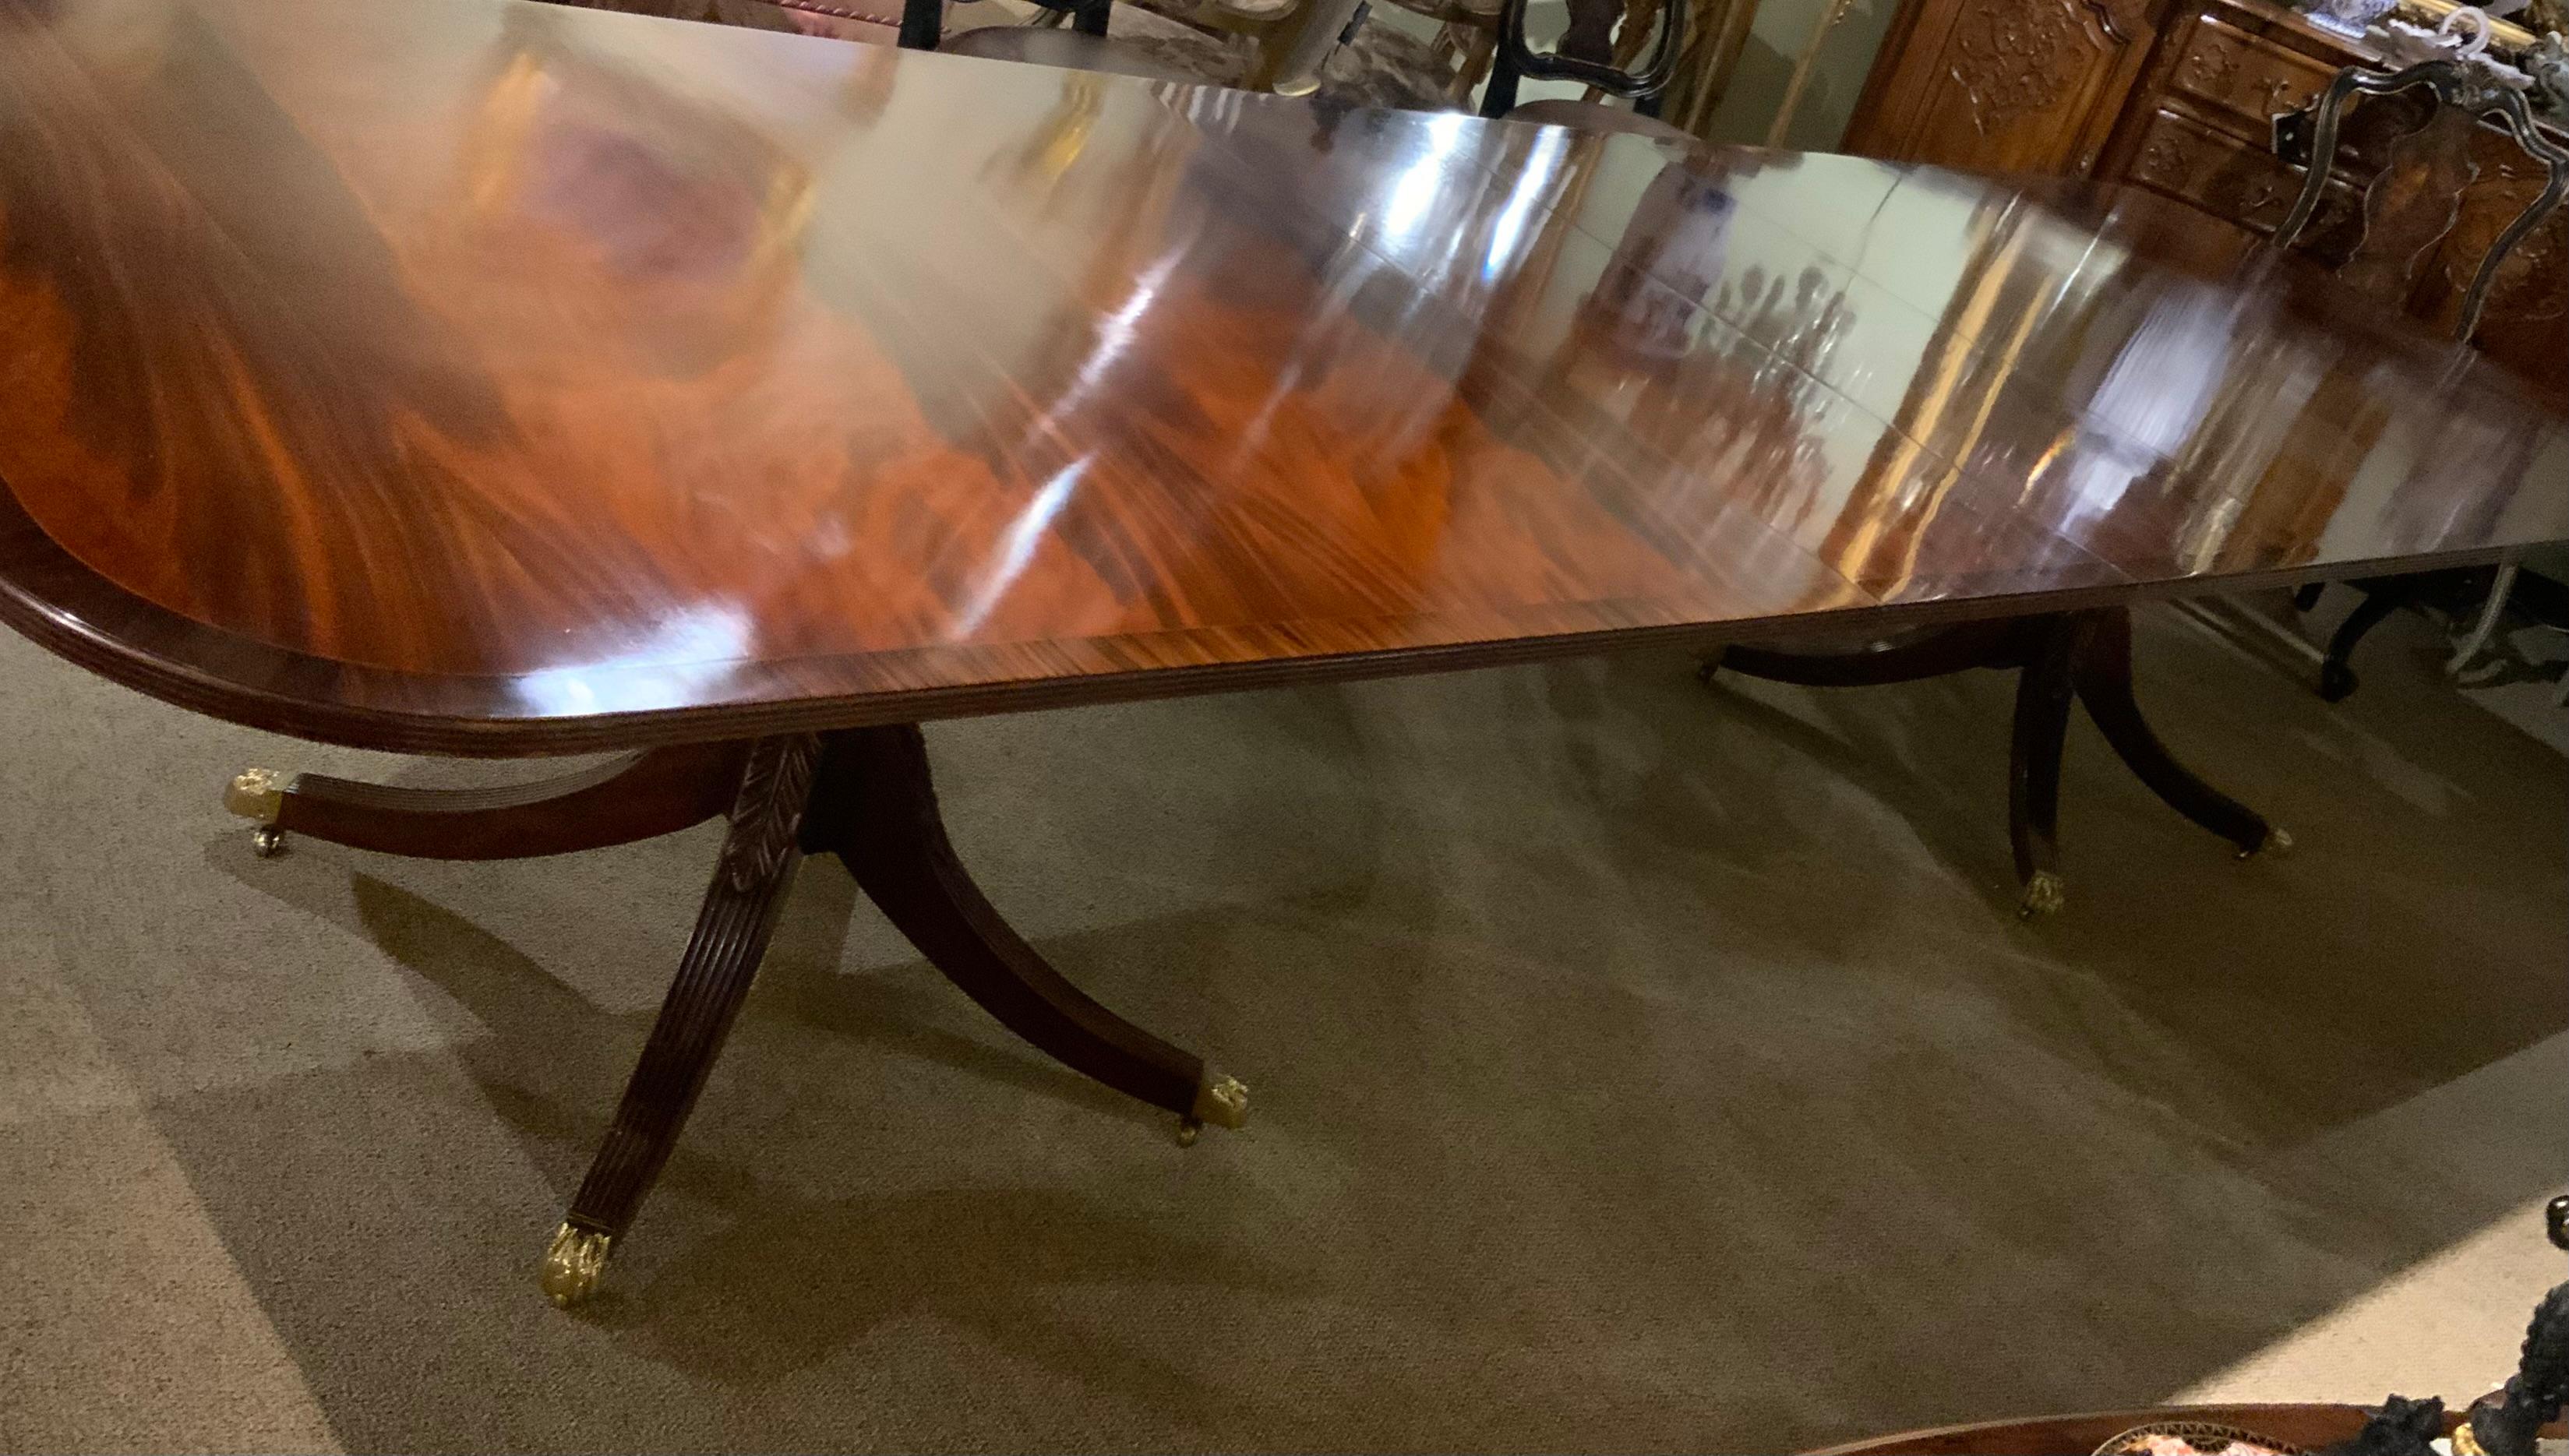 This flame mahogany table is made of the finest wood.
It was custom made by a New York cabinet maker by
Smith and Watson. Each pedestal is well carved with 
Four legs that spay outward and that have feet with
Brass toes and castors. The edge of the